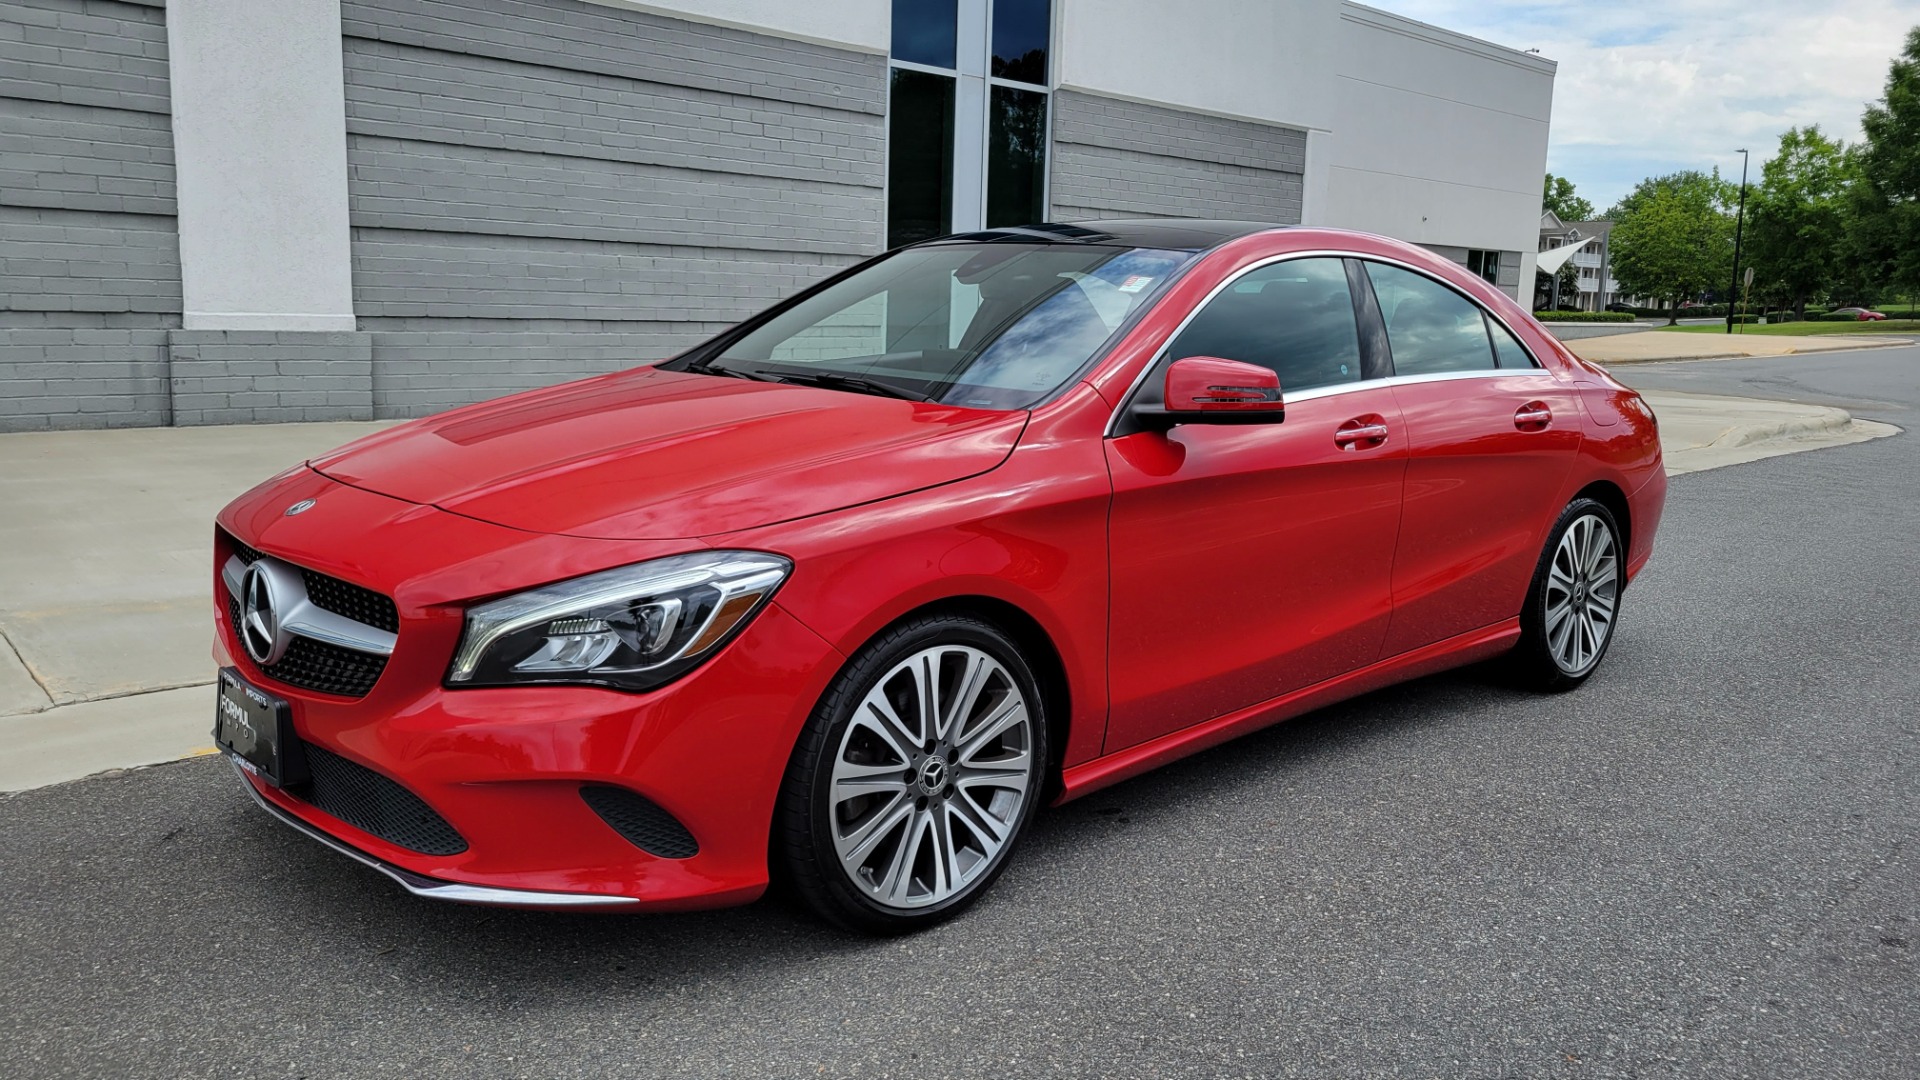 Used 2019 Mercedes-Benz CLA 250 PREMIUM / CONV PKG / PANO-ROOF / H/K SND / CAMERA for sale Sold at Formula Imports in Charlotte NC 28227 3